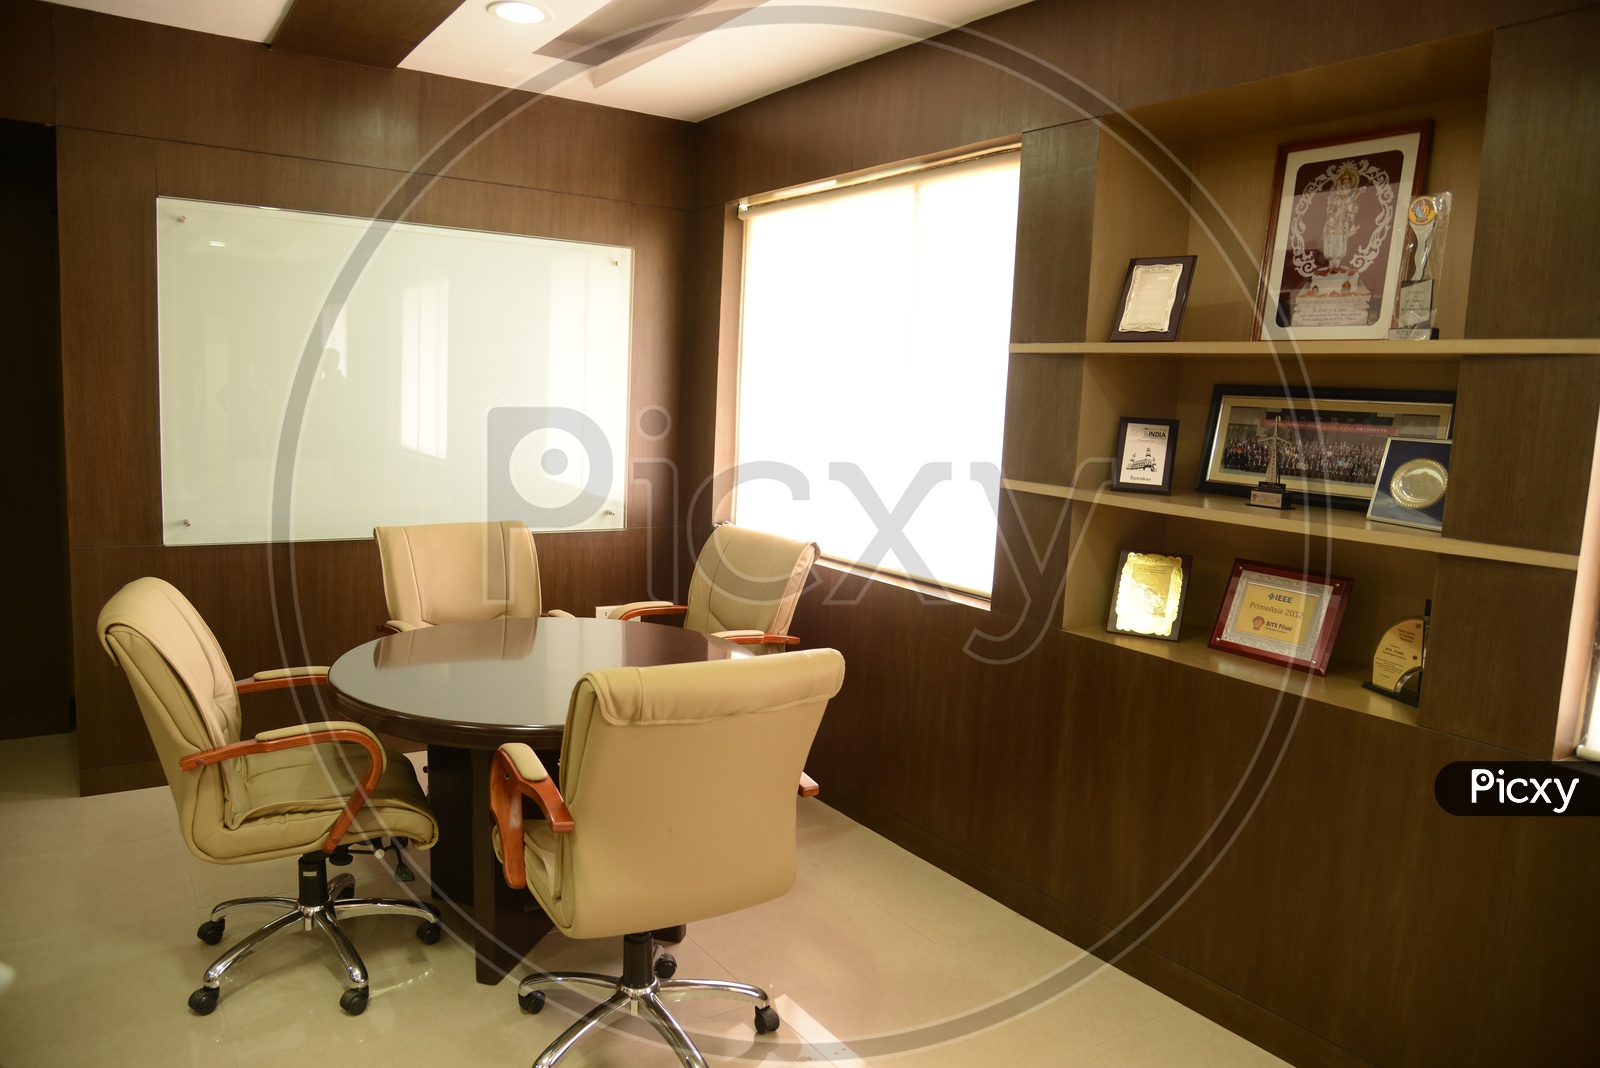 Office Room With Interior And Elegant Furniture